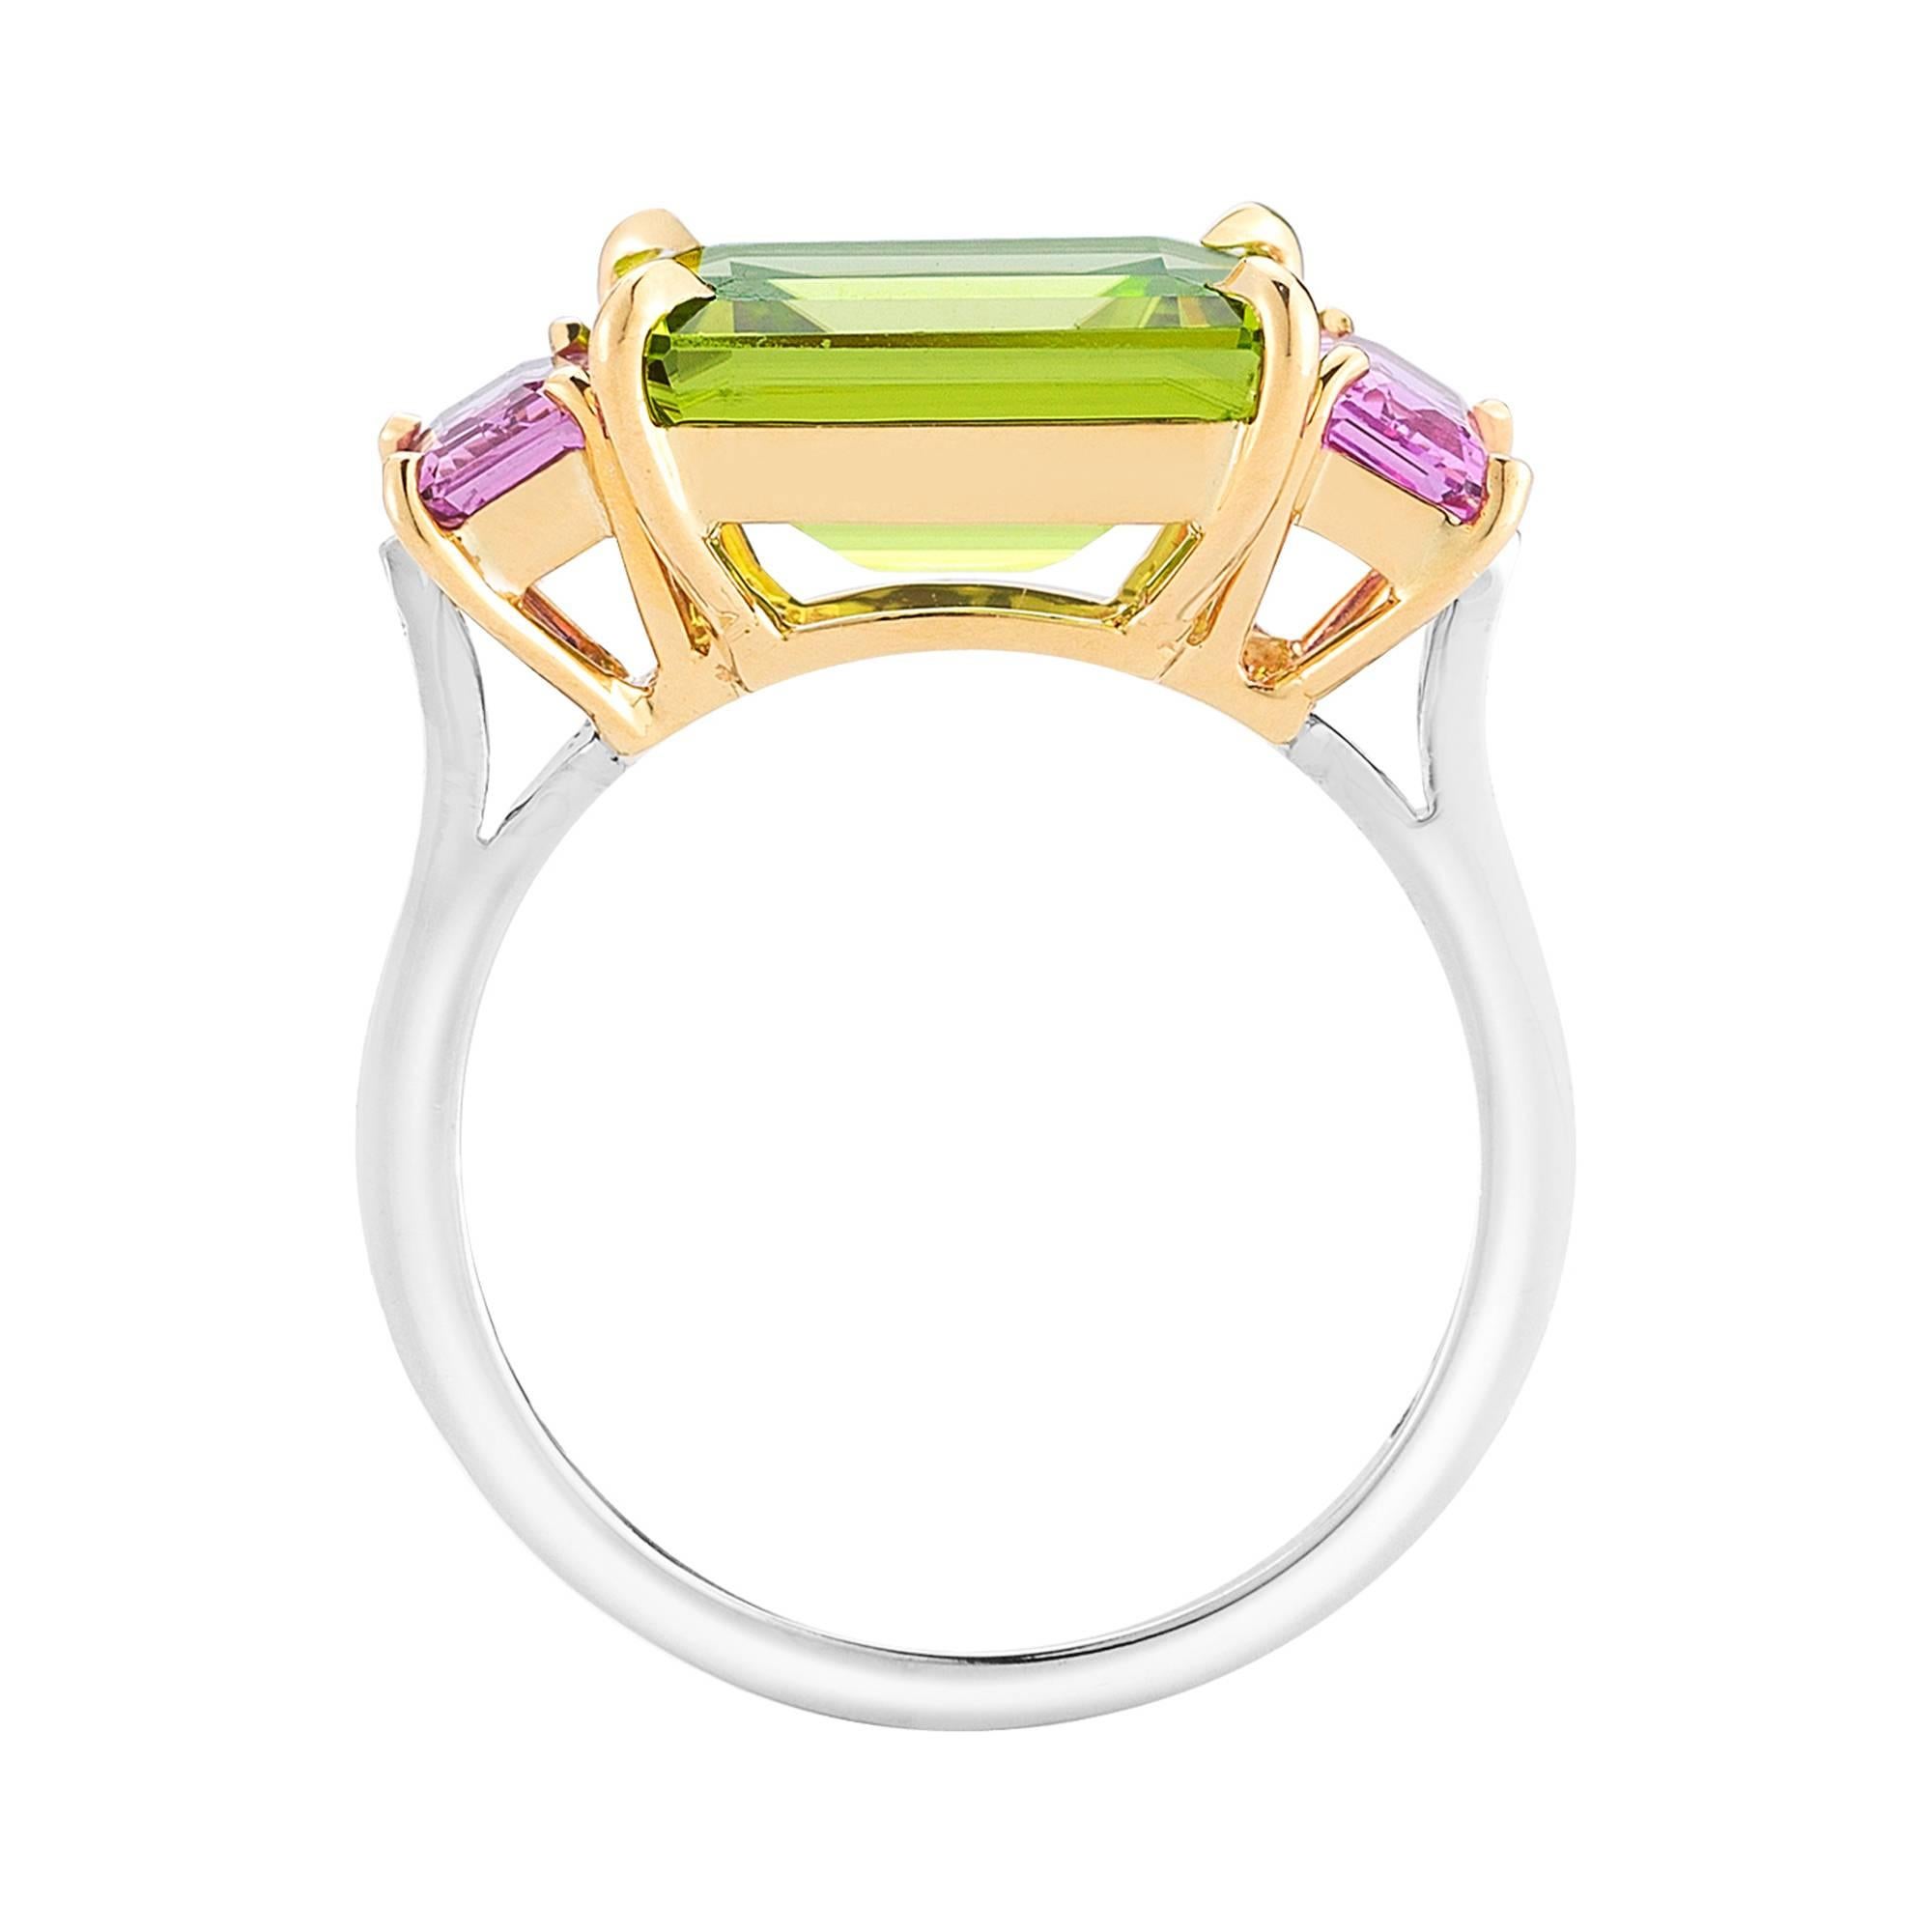 The signature Paolo Costagli three-stone Florentine ring set in 18kt yellow and white gold with an emerald-cut peridot, 6.36 carats flanked by emerald-cut pink sapphires, 1.36 carats and diamond detail, 0.16 carats.

Inspired by the Garden of the